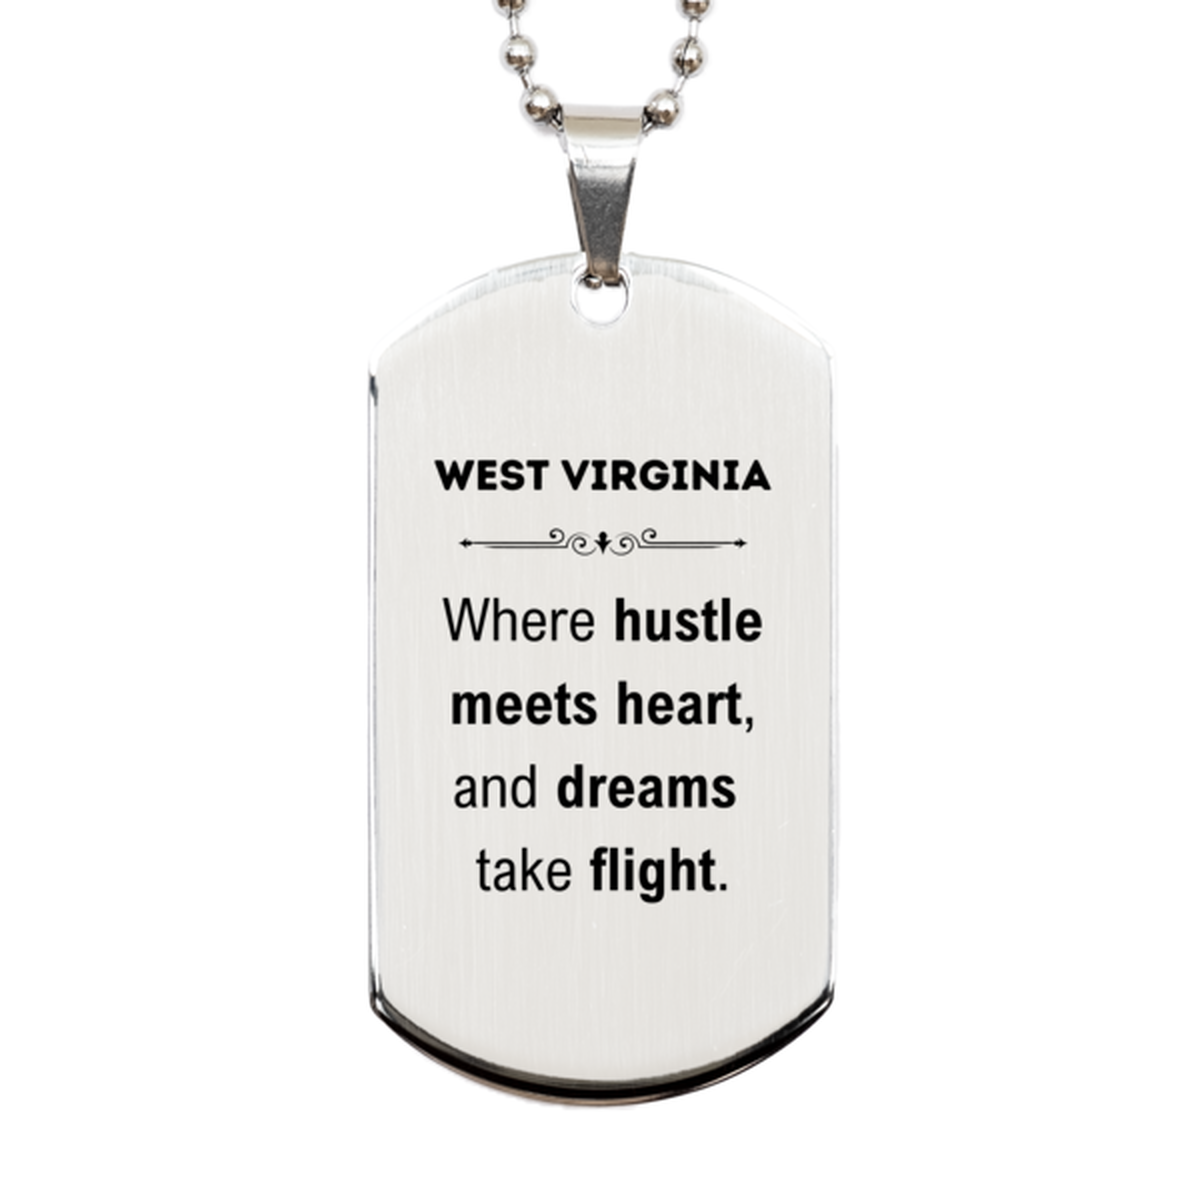 West Virginia: Where hustle meets heart, and dreams take flight, West Virginia Gifts, Proud West Virginia Christmas Birthday West Virginia Silver Dog Tag, West Virginia State People, Men, Women, Friends